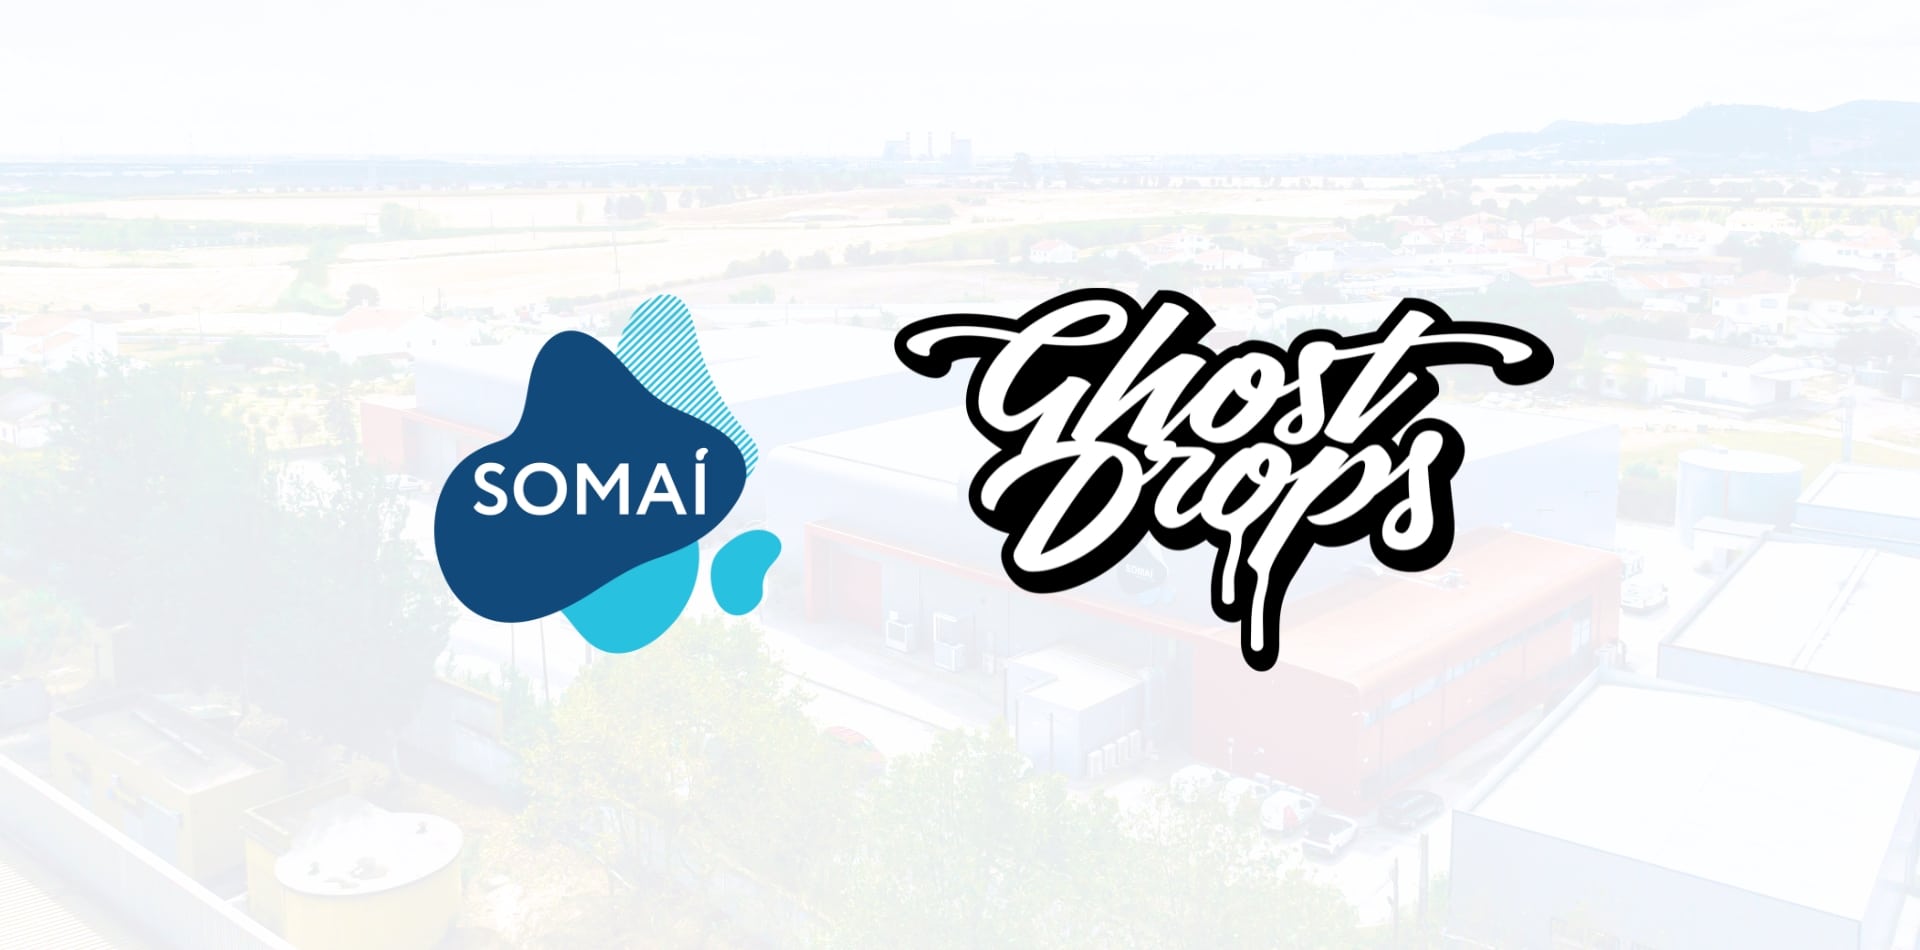 Leading Canadian Cannabis Brand Ghost Drops Enters into an Agreement with SOMAÍ Group for Global Distribution